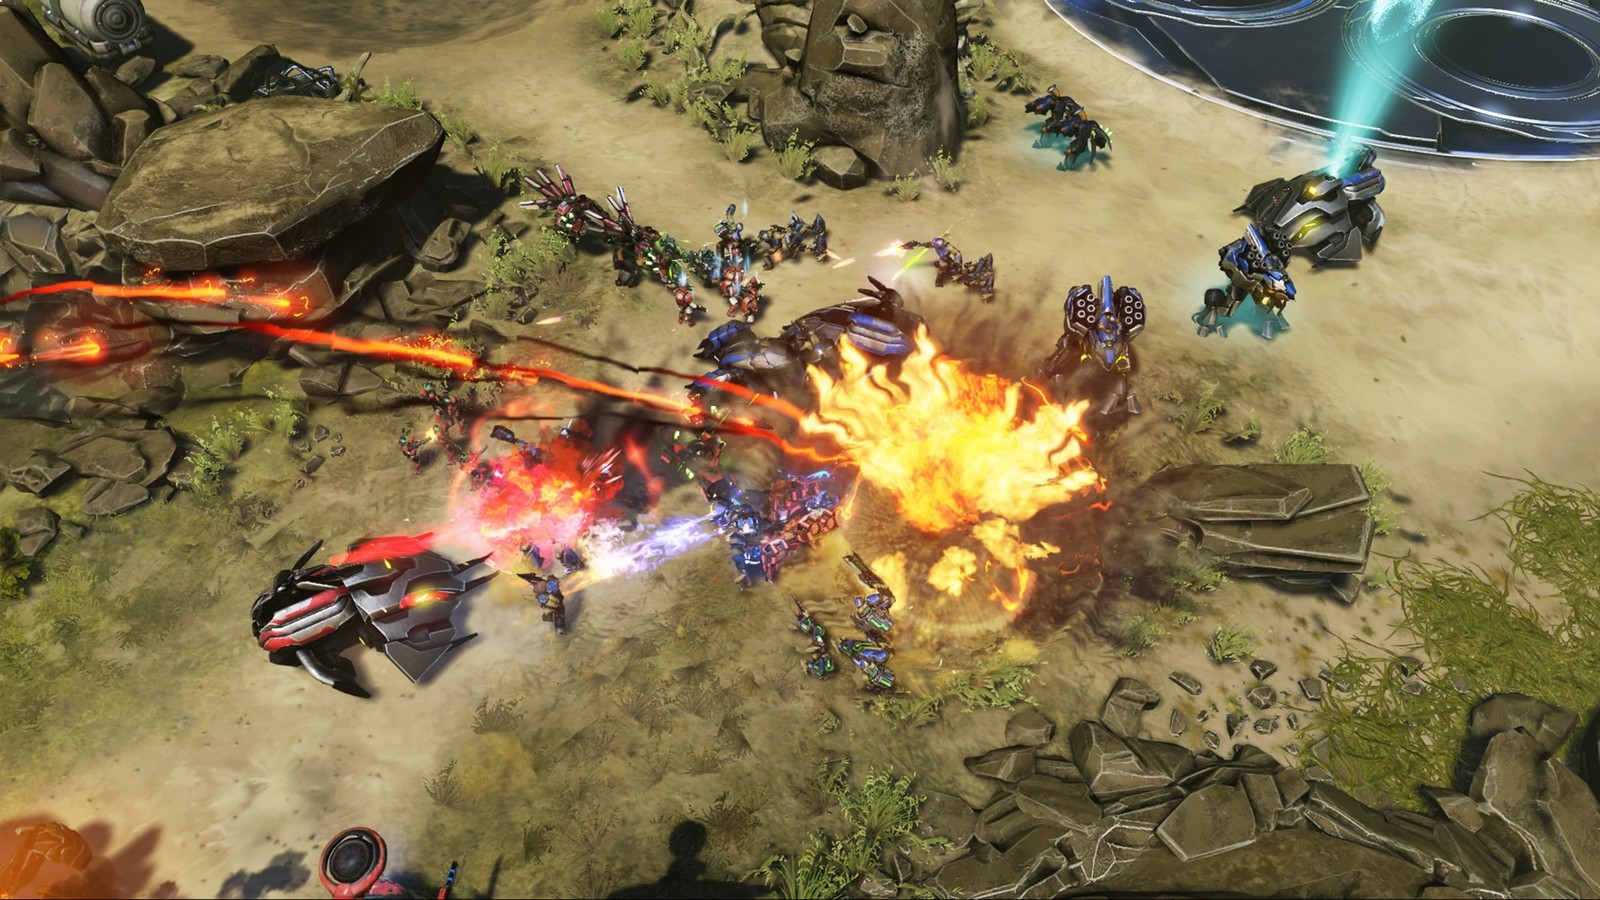 Halo Wars 2 Preview: The final look before launch